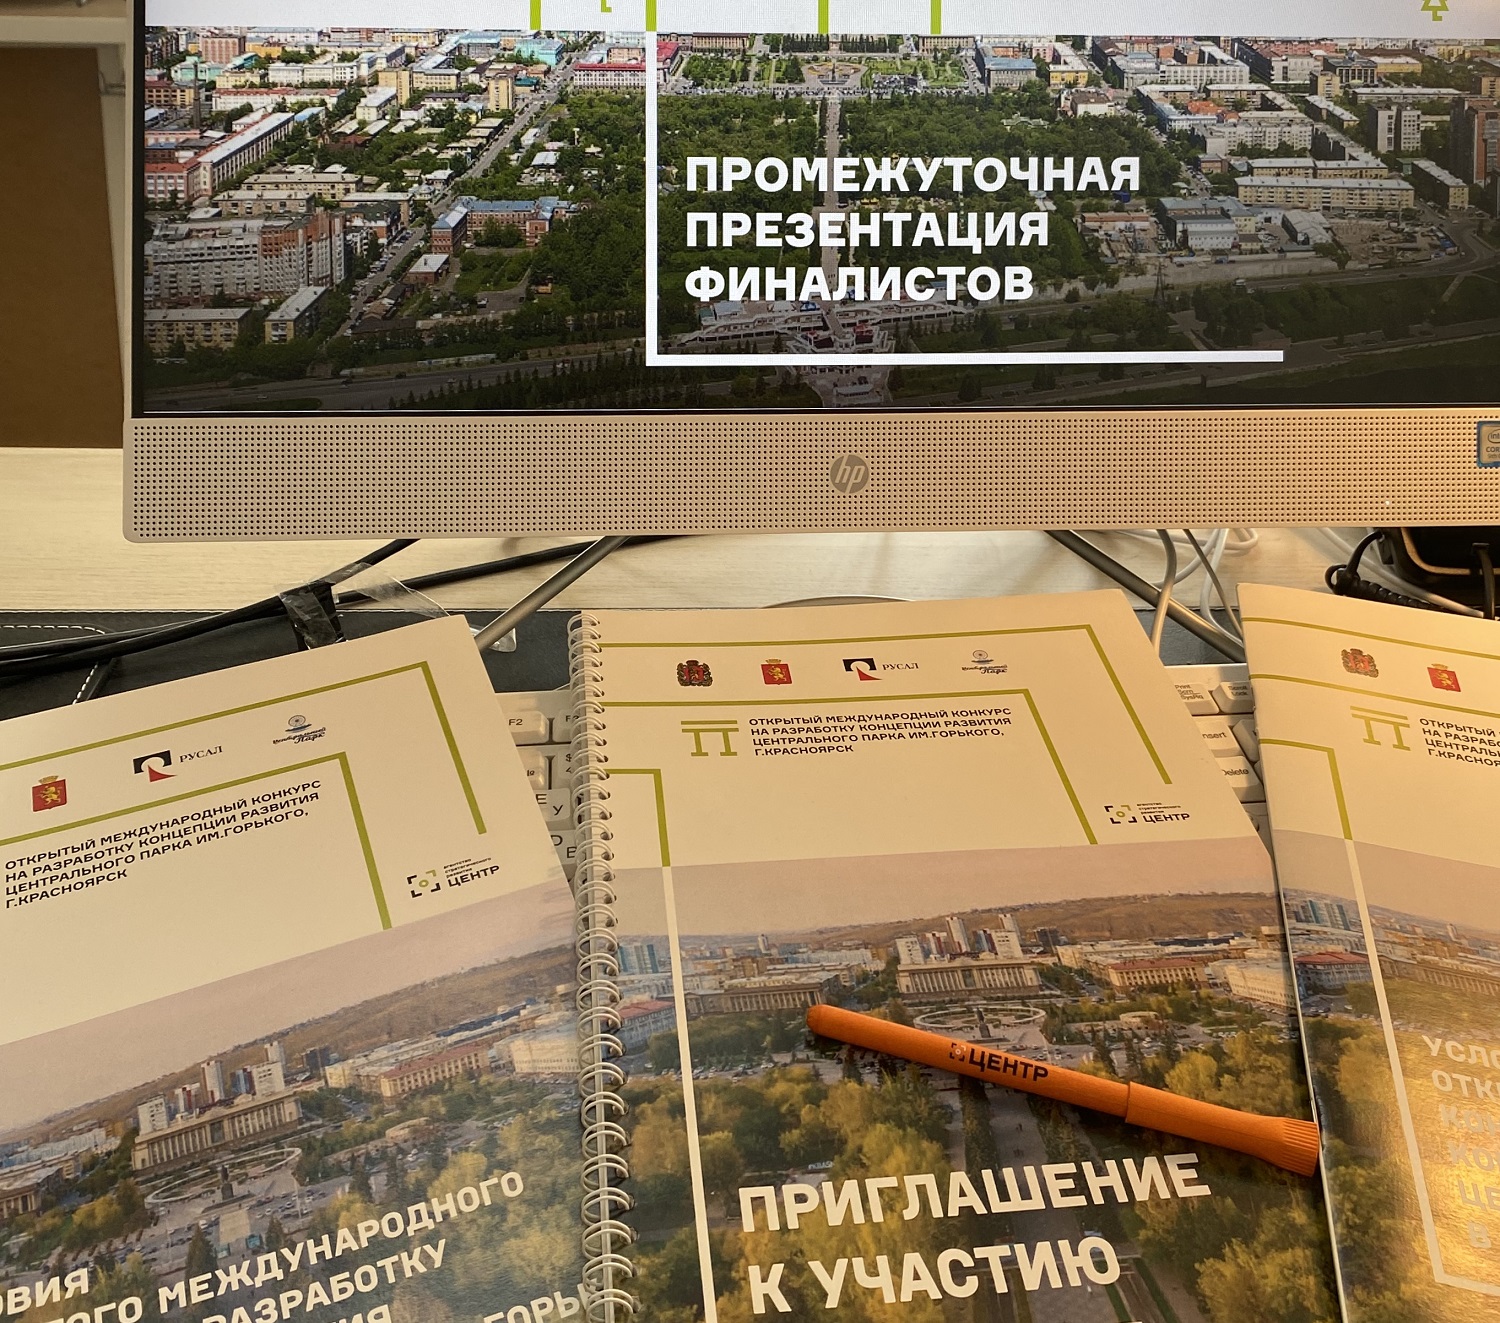 On November 17 preliminary presentation of the competition finalists took place